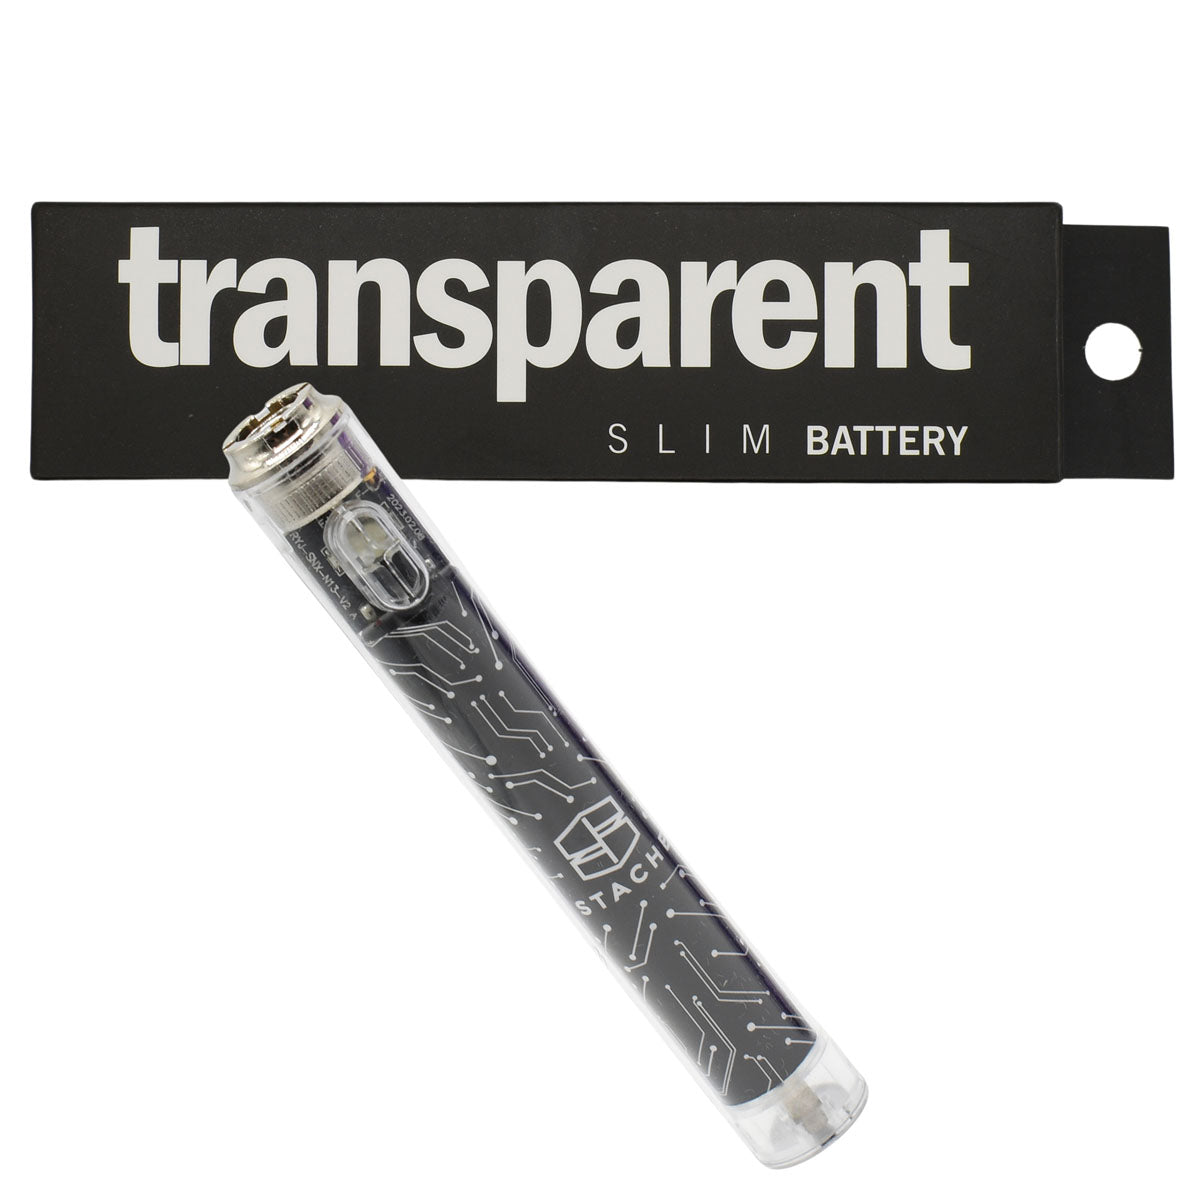 Transparent Slim 510 battery - black option, with packaging